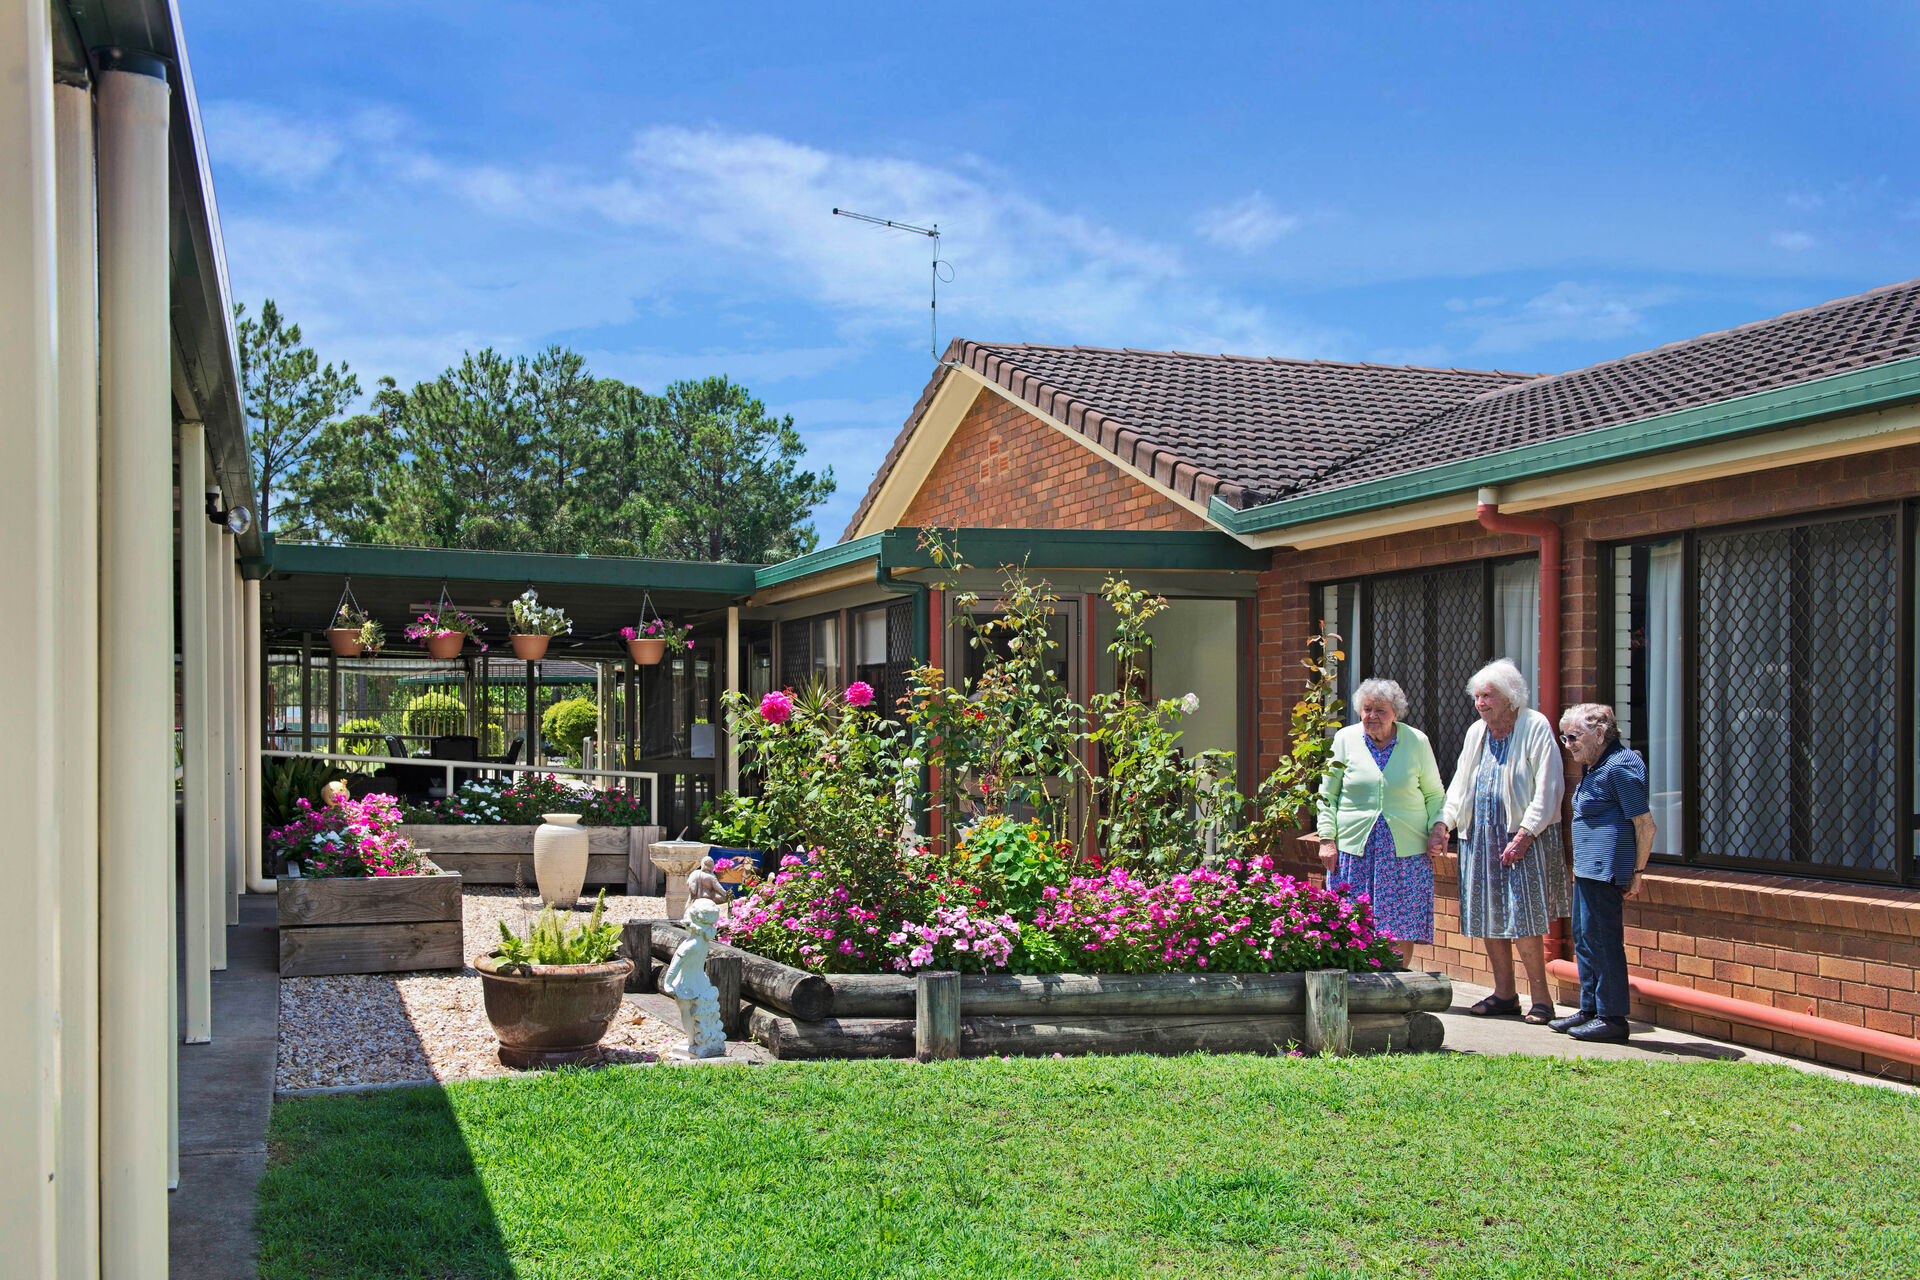 aged care home residents enjoying time in the gardens at baptistcare mid richmond centre residential aged care facility in coraki nsw far north coast